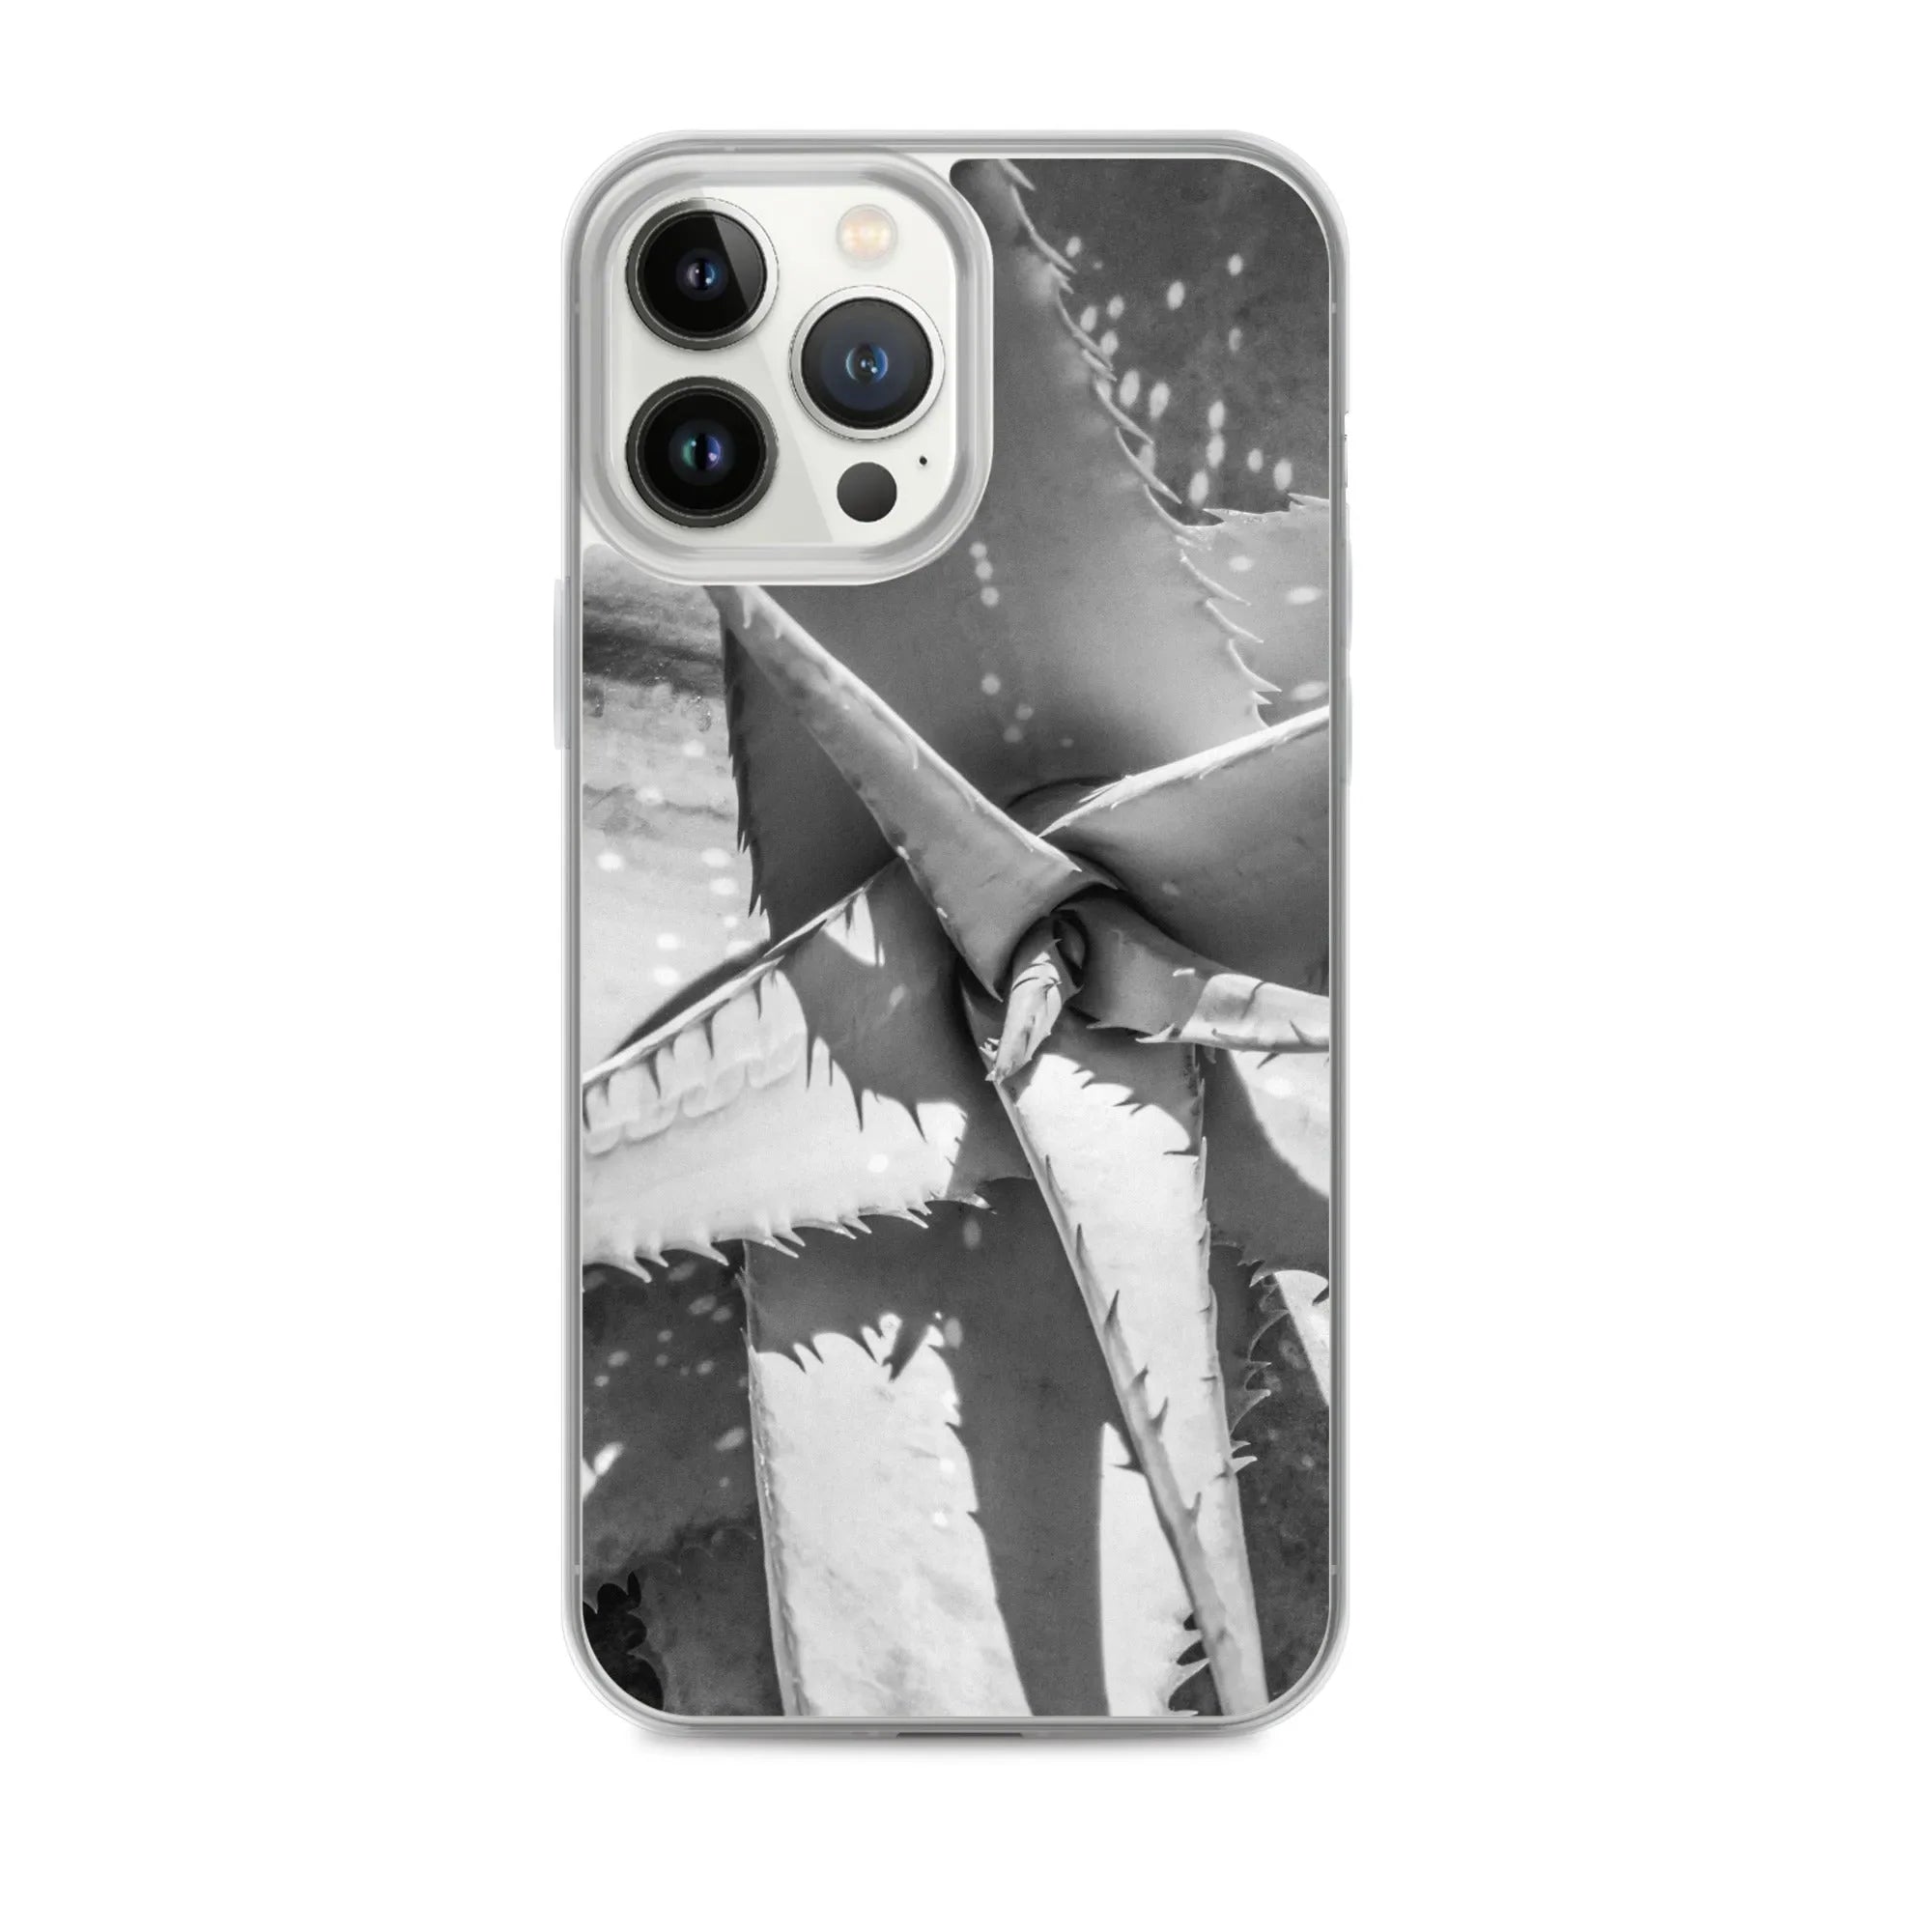 Starry-eyed Botanical Art Iphone Case - Black And White - Iphone 13 Pro Max - Mobile Phone Cases - Aesthetic Art